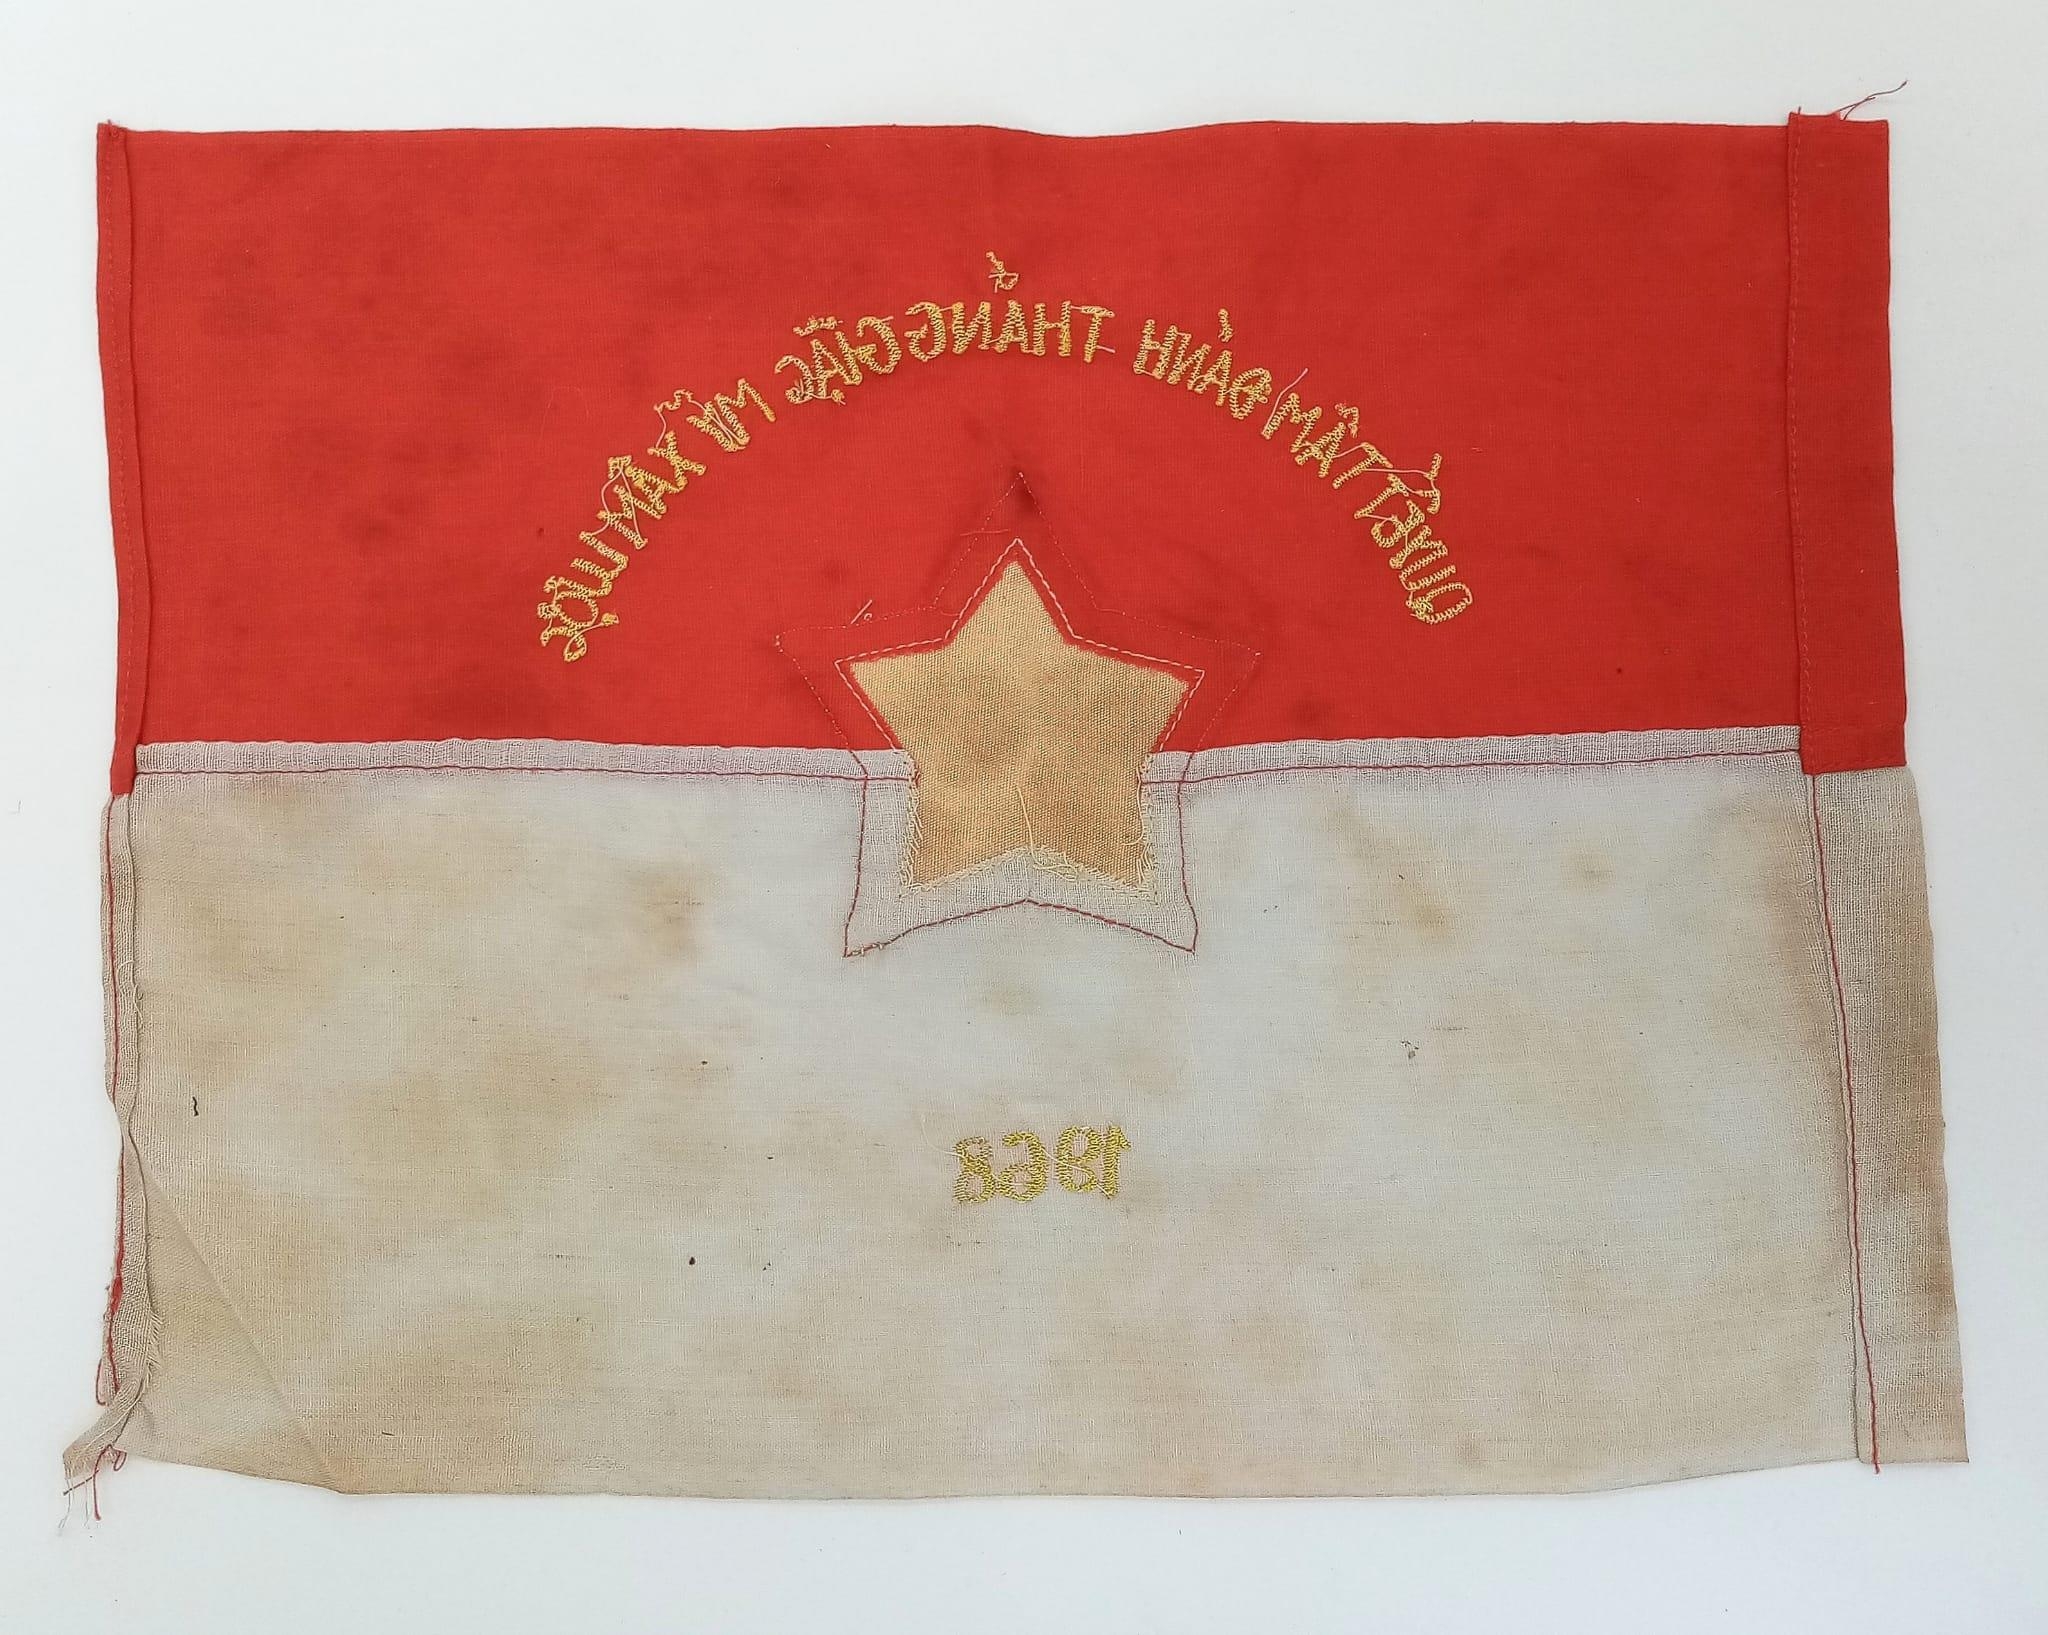 Vietnam War Era Vietcong Victory Banner 30 x 22 cm “Chose To Fight, Fight To Win-Destroying the - Image 2 of 2